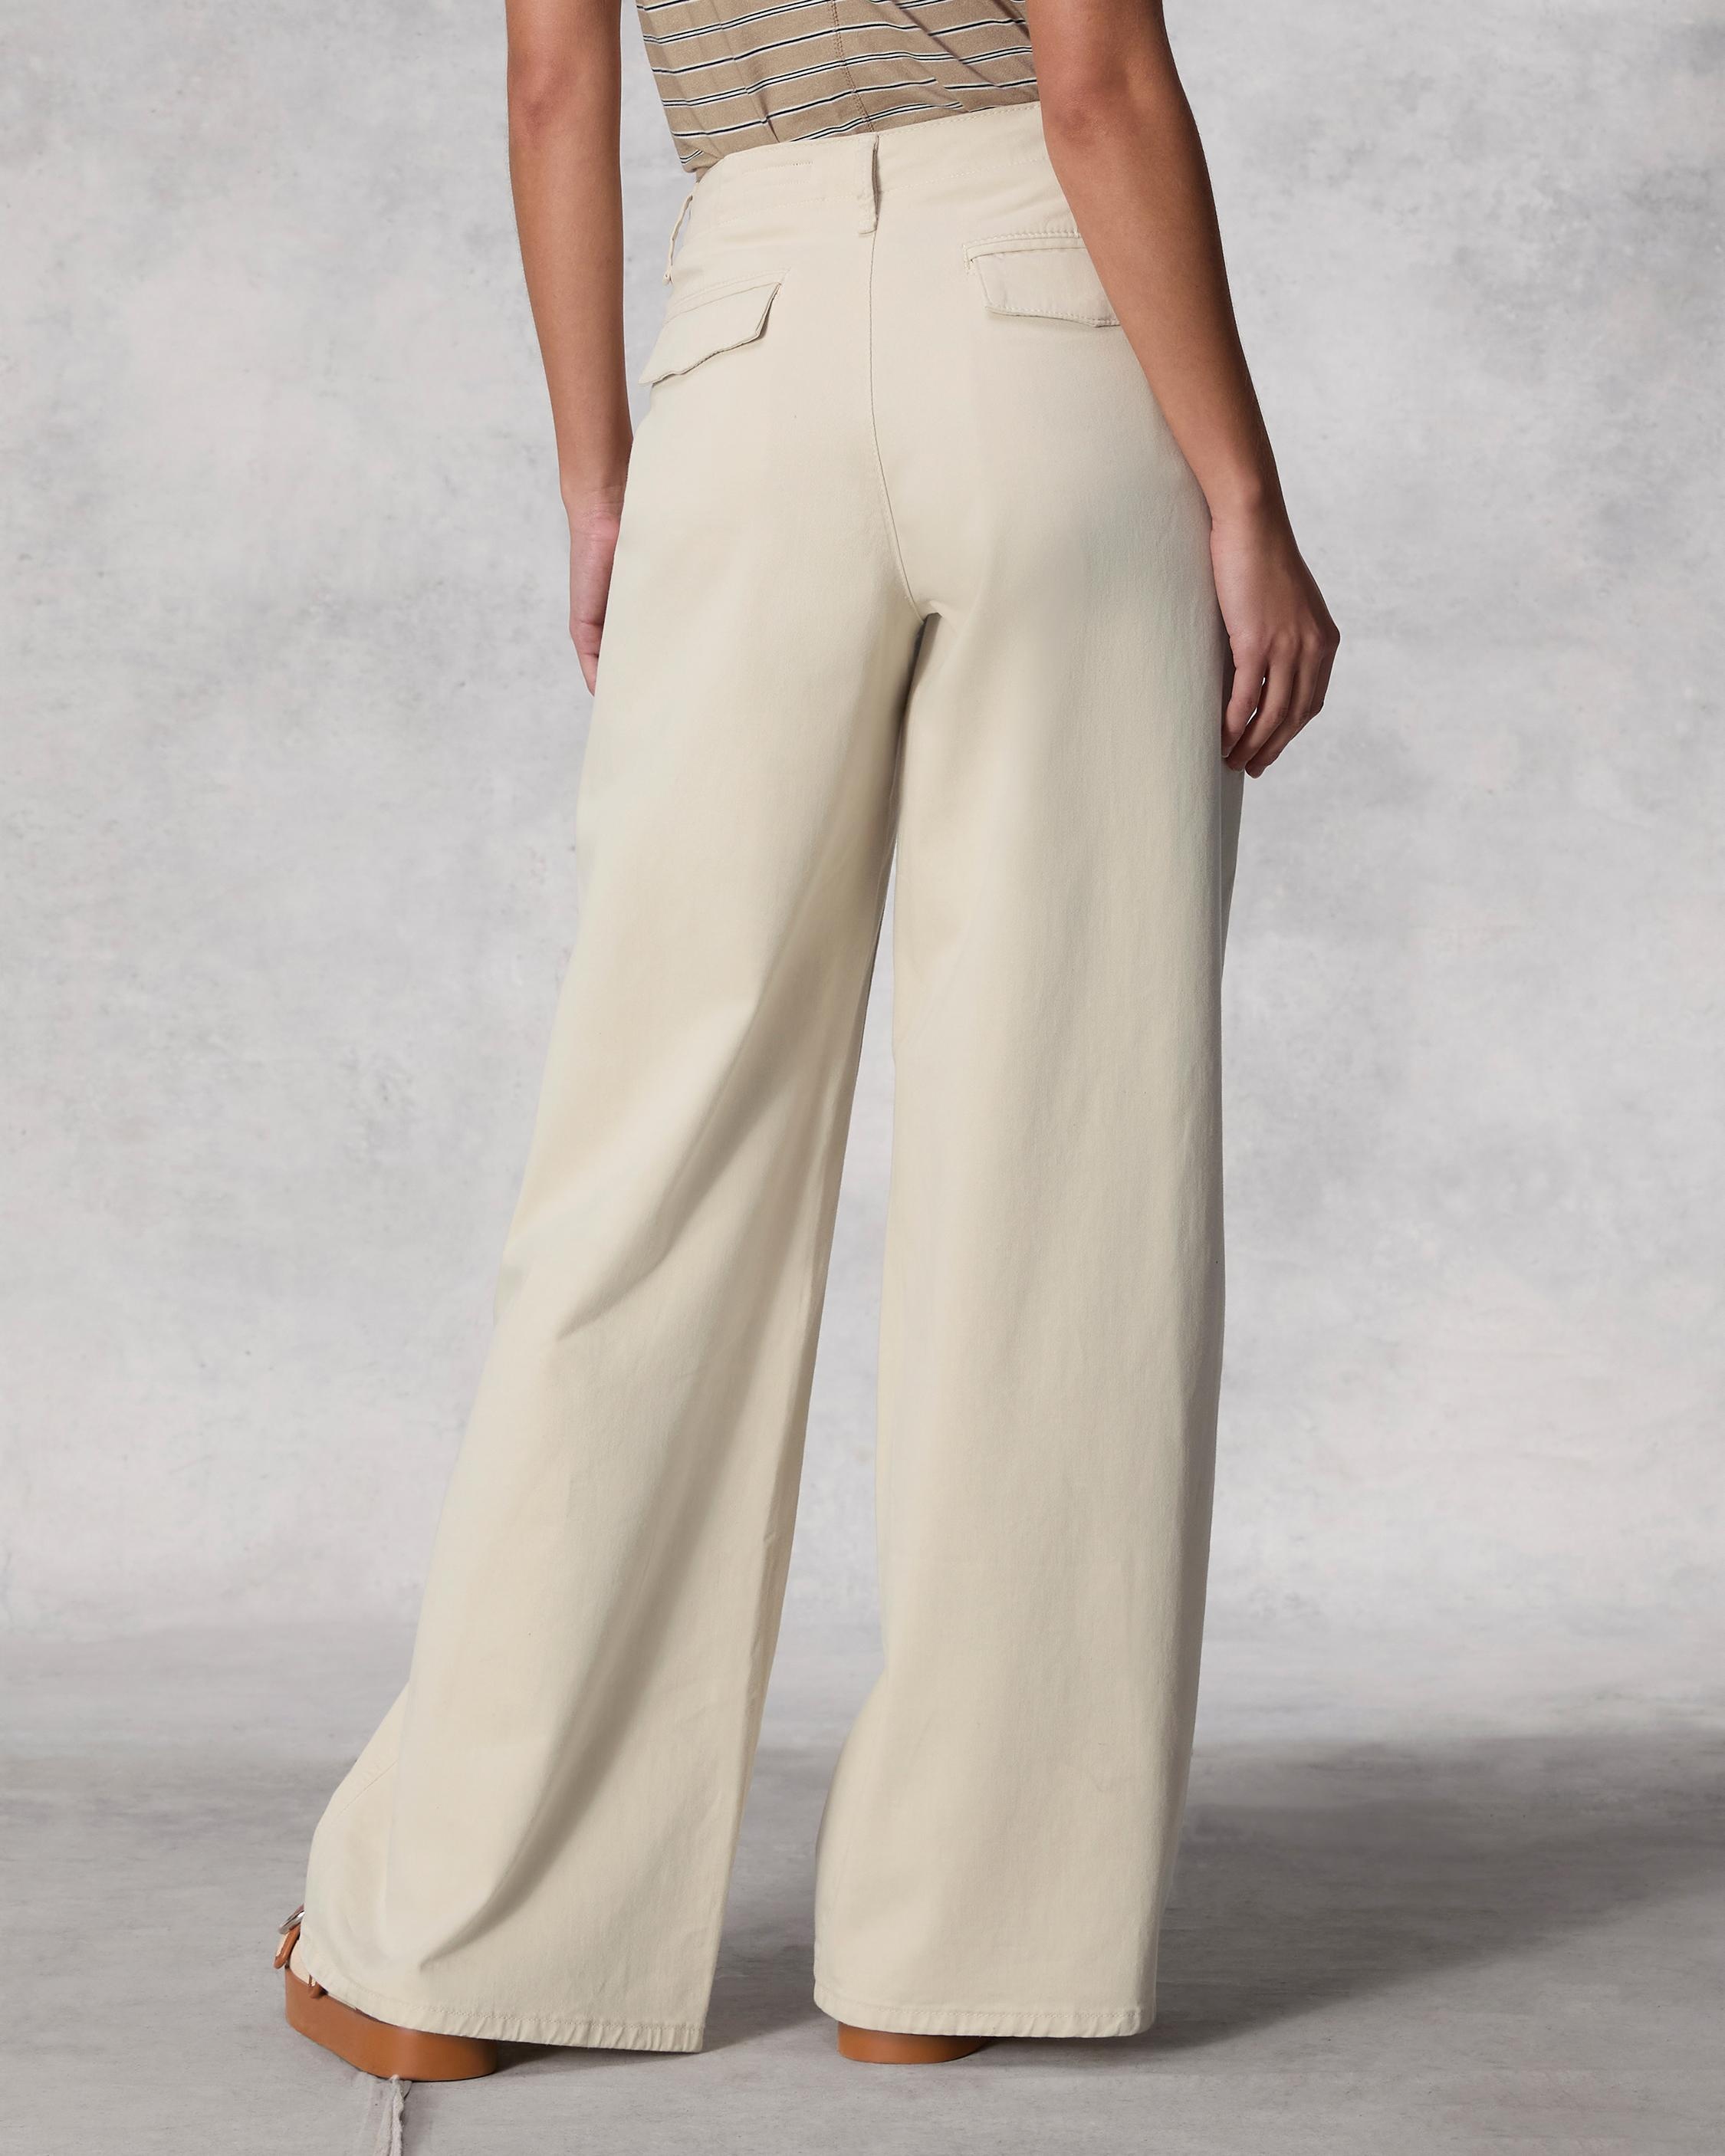 Sofie Wide-Leg Cotton Chino
Relaxed Fit - 4